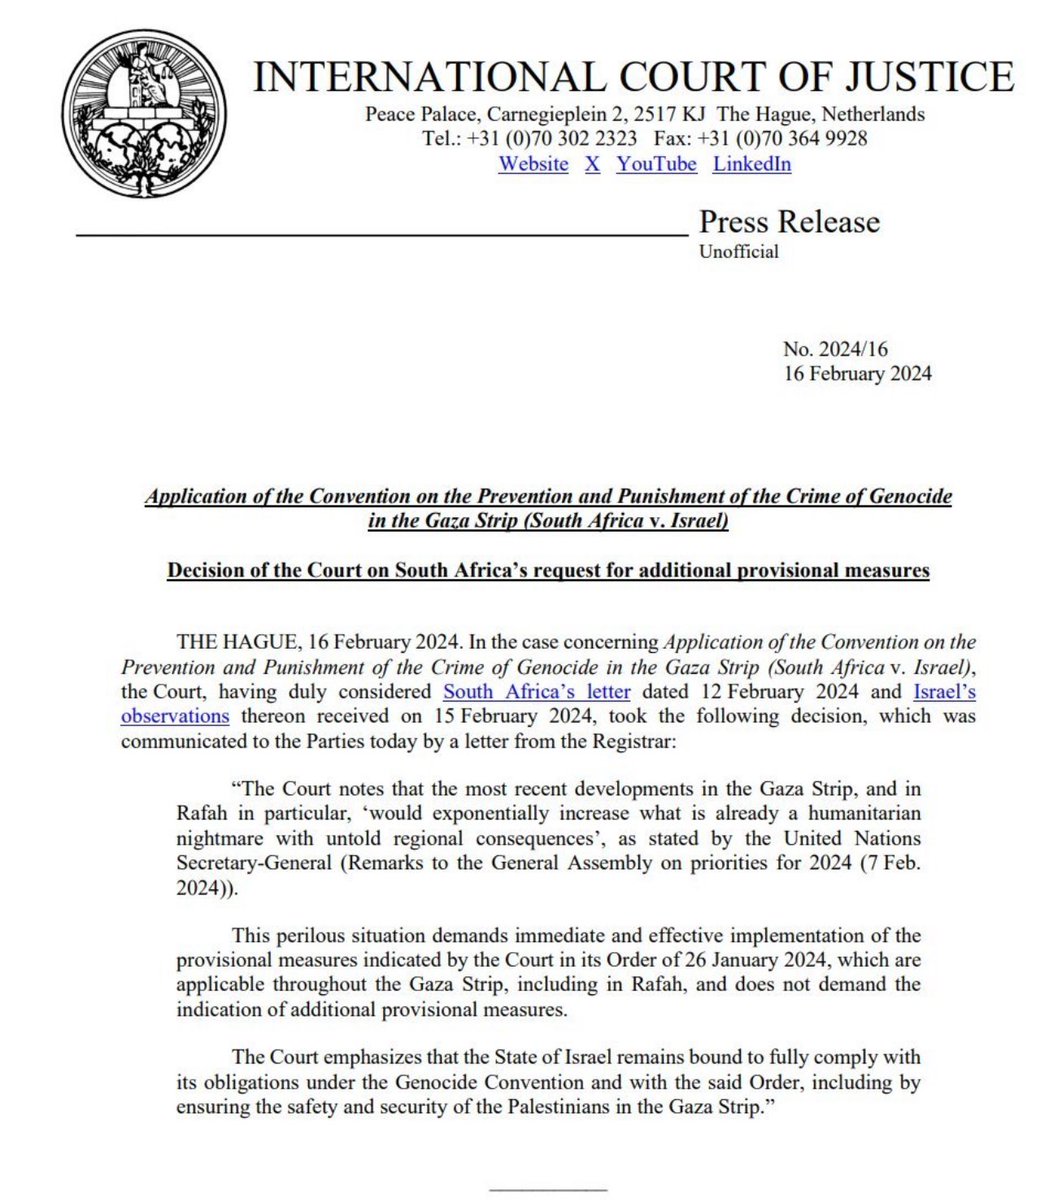 BREAKING: ICJ REJECT SOUTH AFRICA’S APPLICATION AND SAY THE ESCALATION IN RAFAH DOES NOT REQUIRE ADDITIONAL MEASURES The ICJ said the Rafah bombing; “Does not demand the indication of additional provisional measures.”